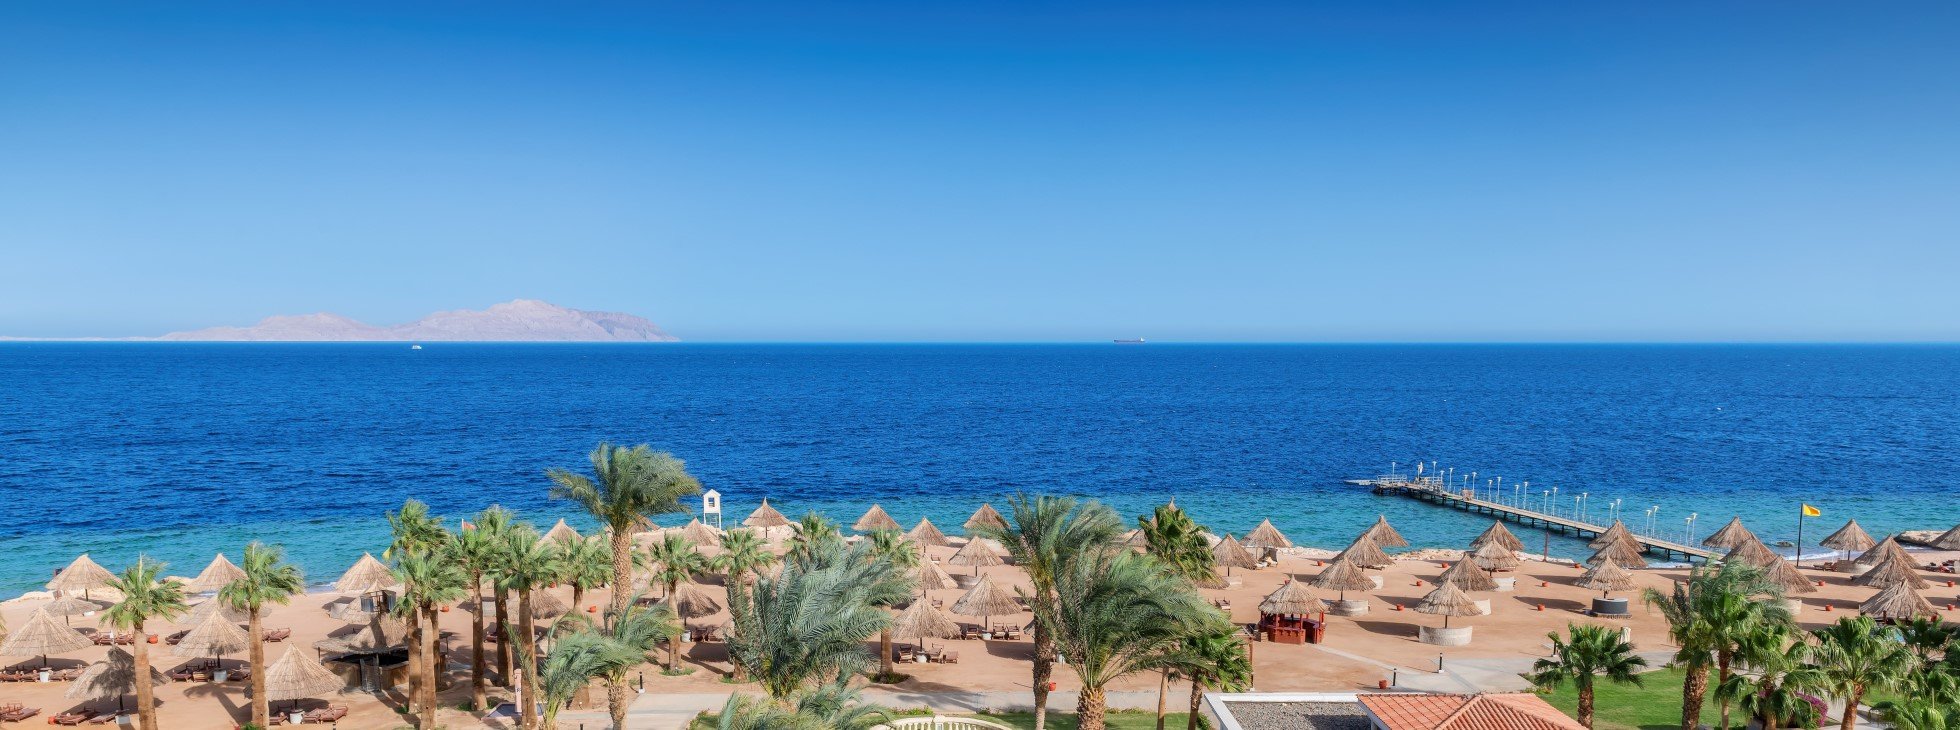 Panoramic view of sunny beach in tropical resort in Red Sea coast in Egypt, Africa